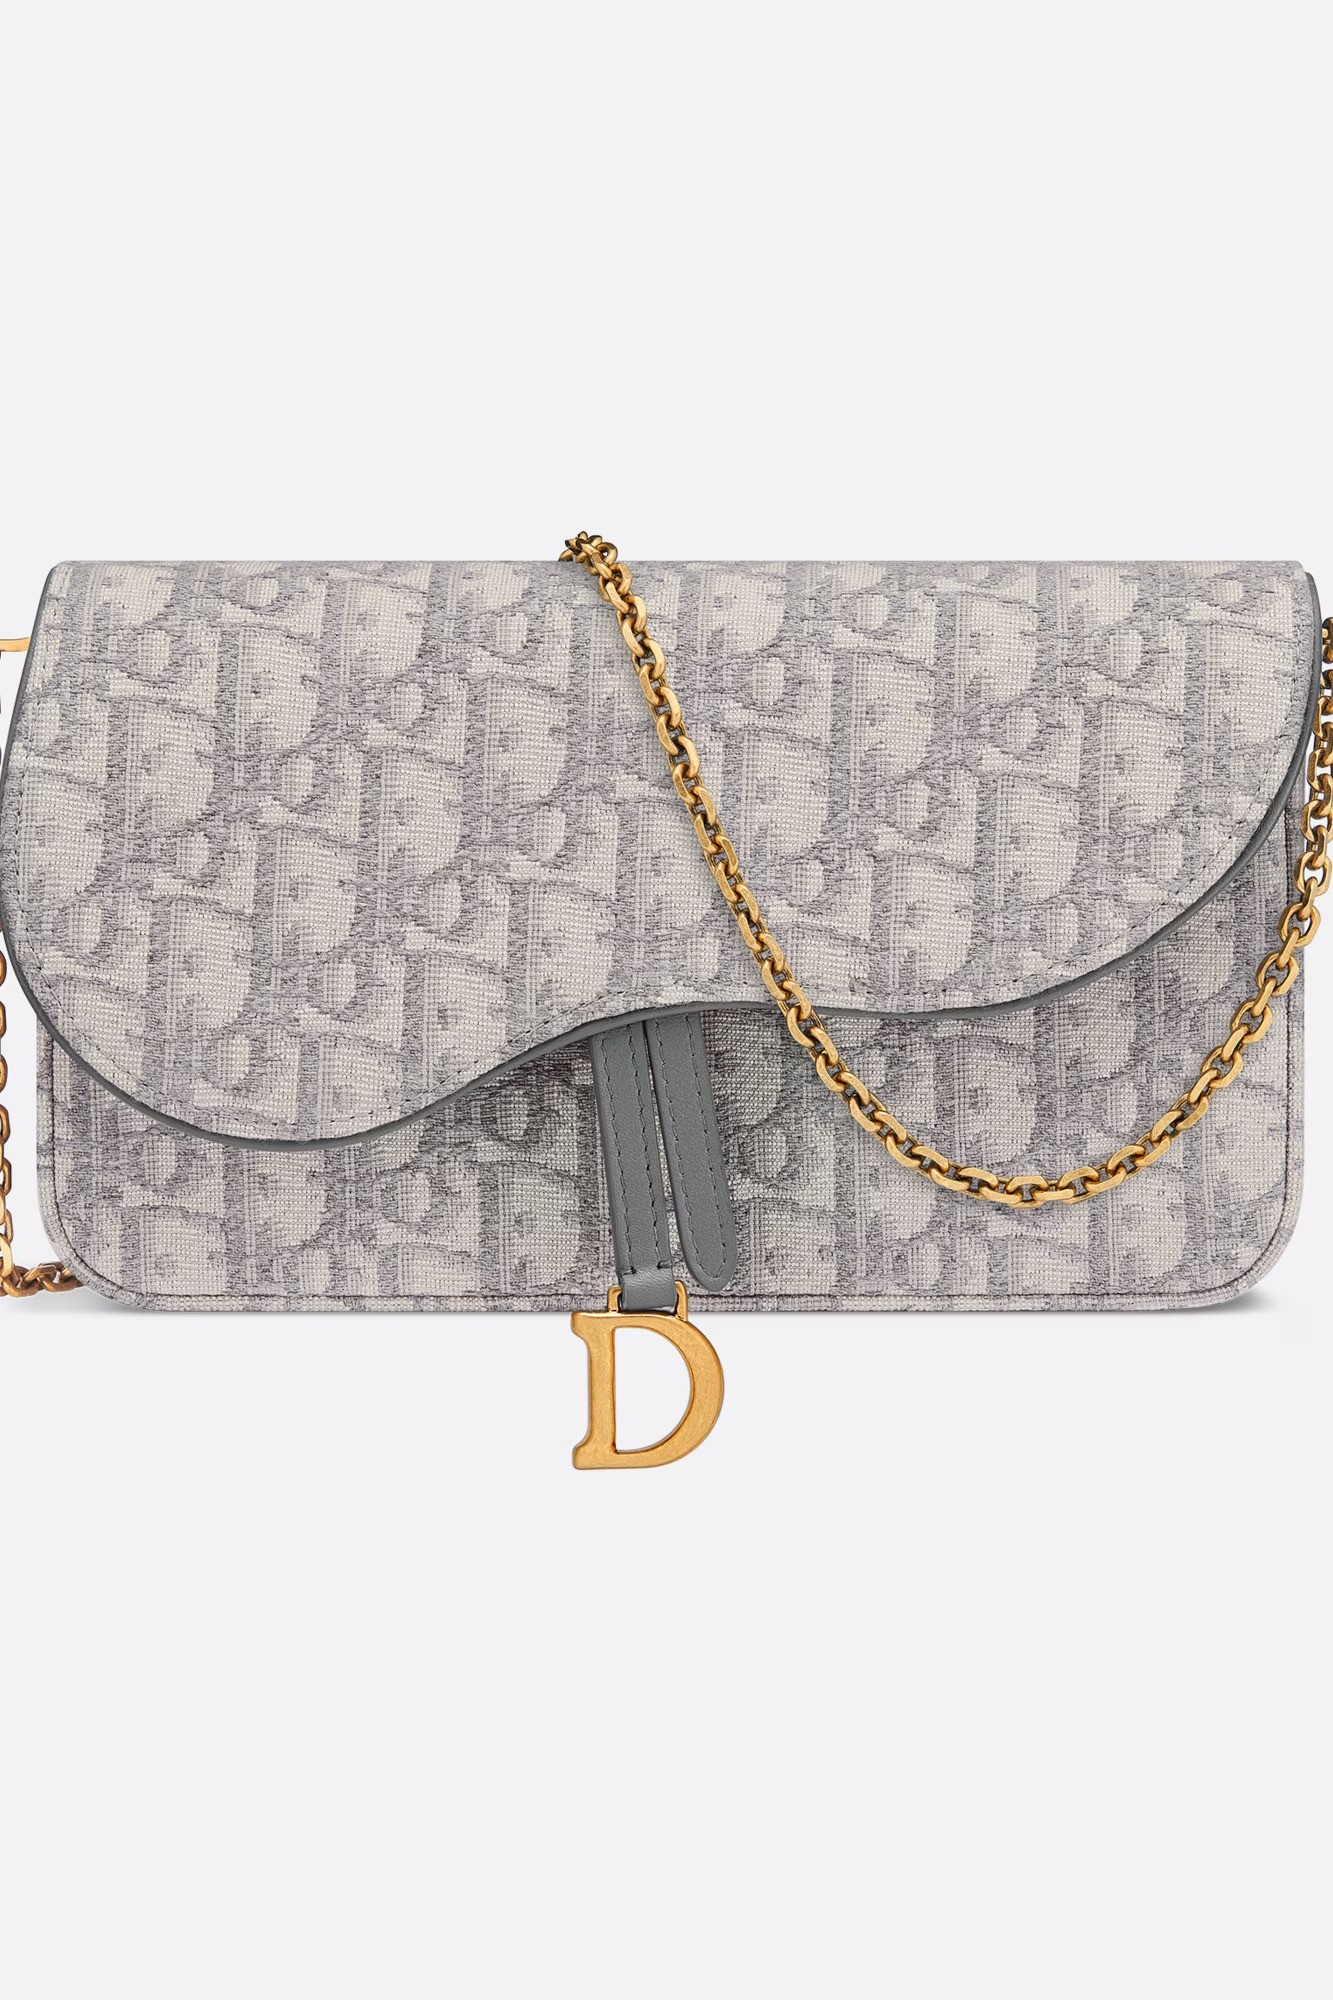 Dior - Saddle Pouch with Chain - Gray